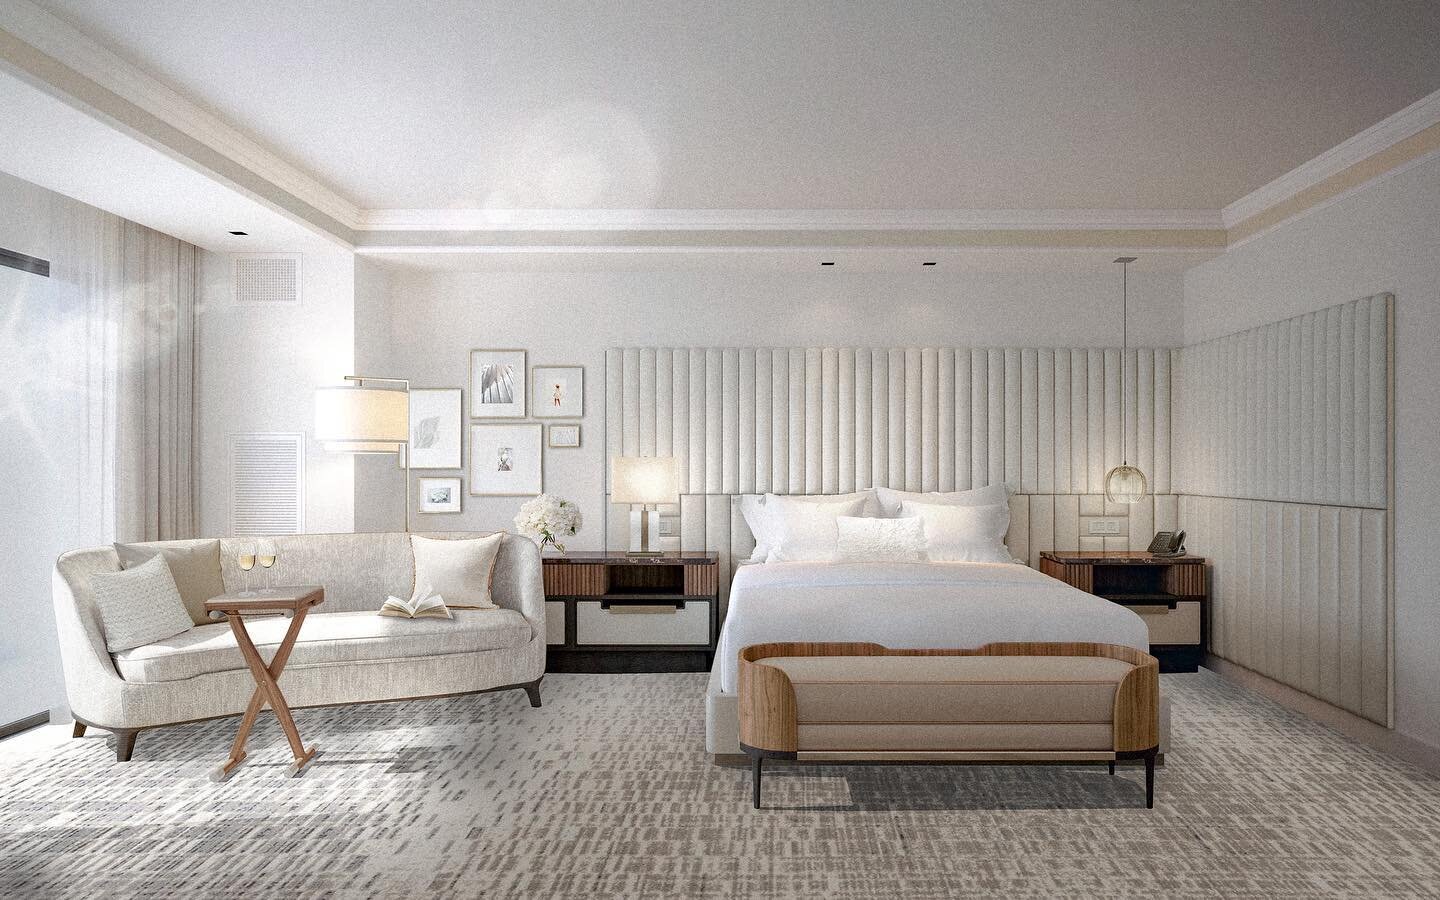 RITZ CARLTON ORLANDO 🤍

💎we got the grand tour of everything this amazing resort has to offer&mdash; from stunning grounds, to newly renovated guest rooms, to the oasis-style spa and incredible pool experience (featuring state-of-the art luxury cab